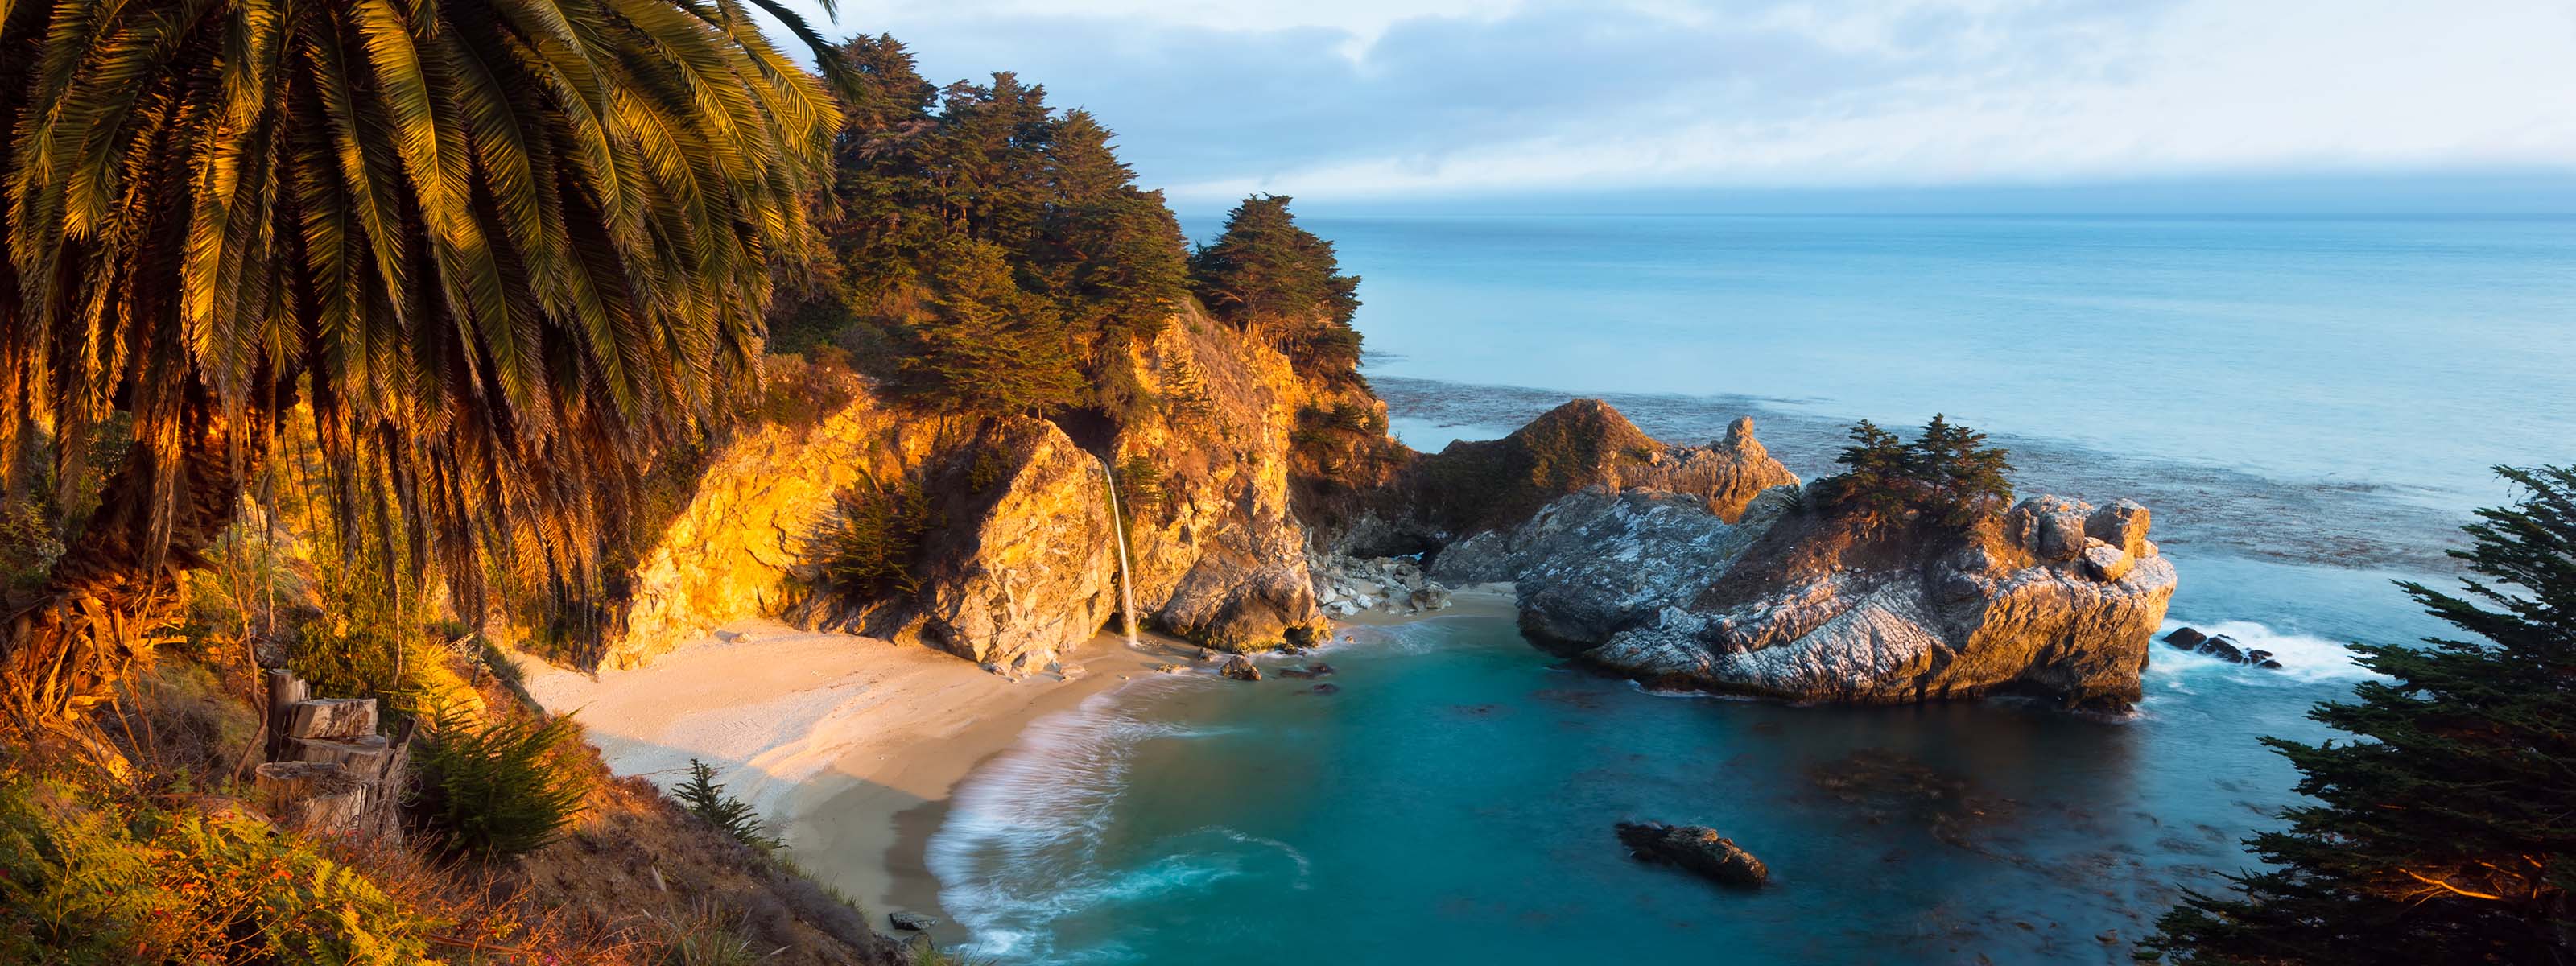 A photography of McWay Falls in Big Sur, California for Casey Mac Photography Prints.